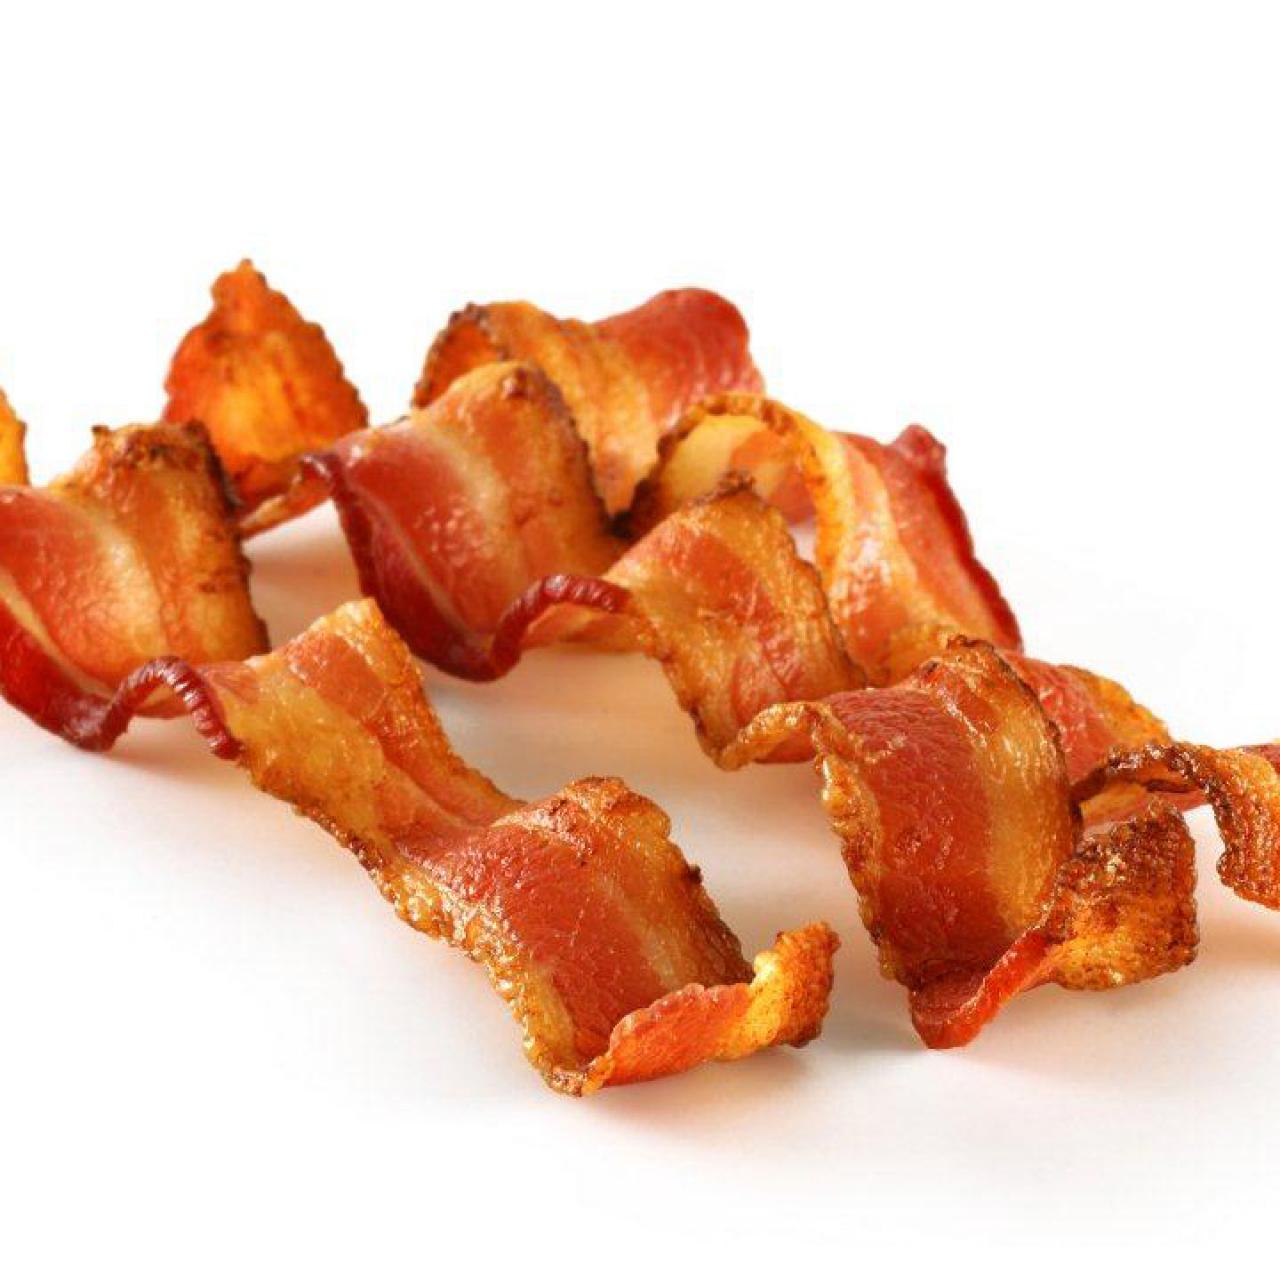 The Best & Worst Bacon Brands, According to a Dietitian